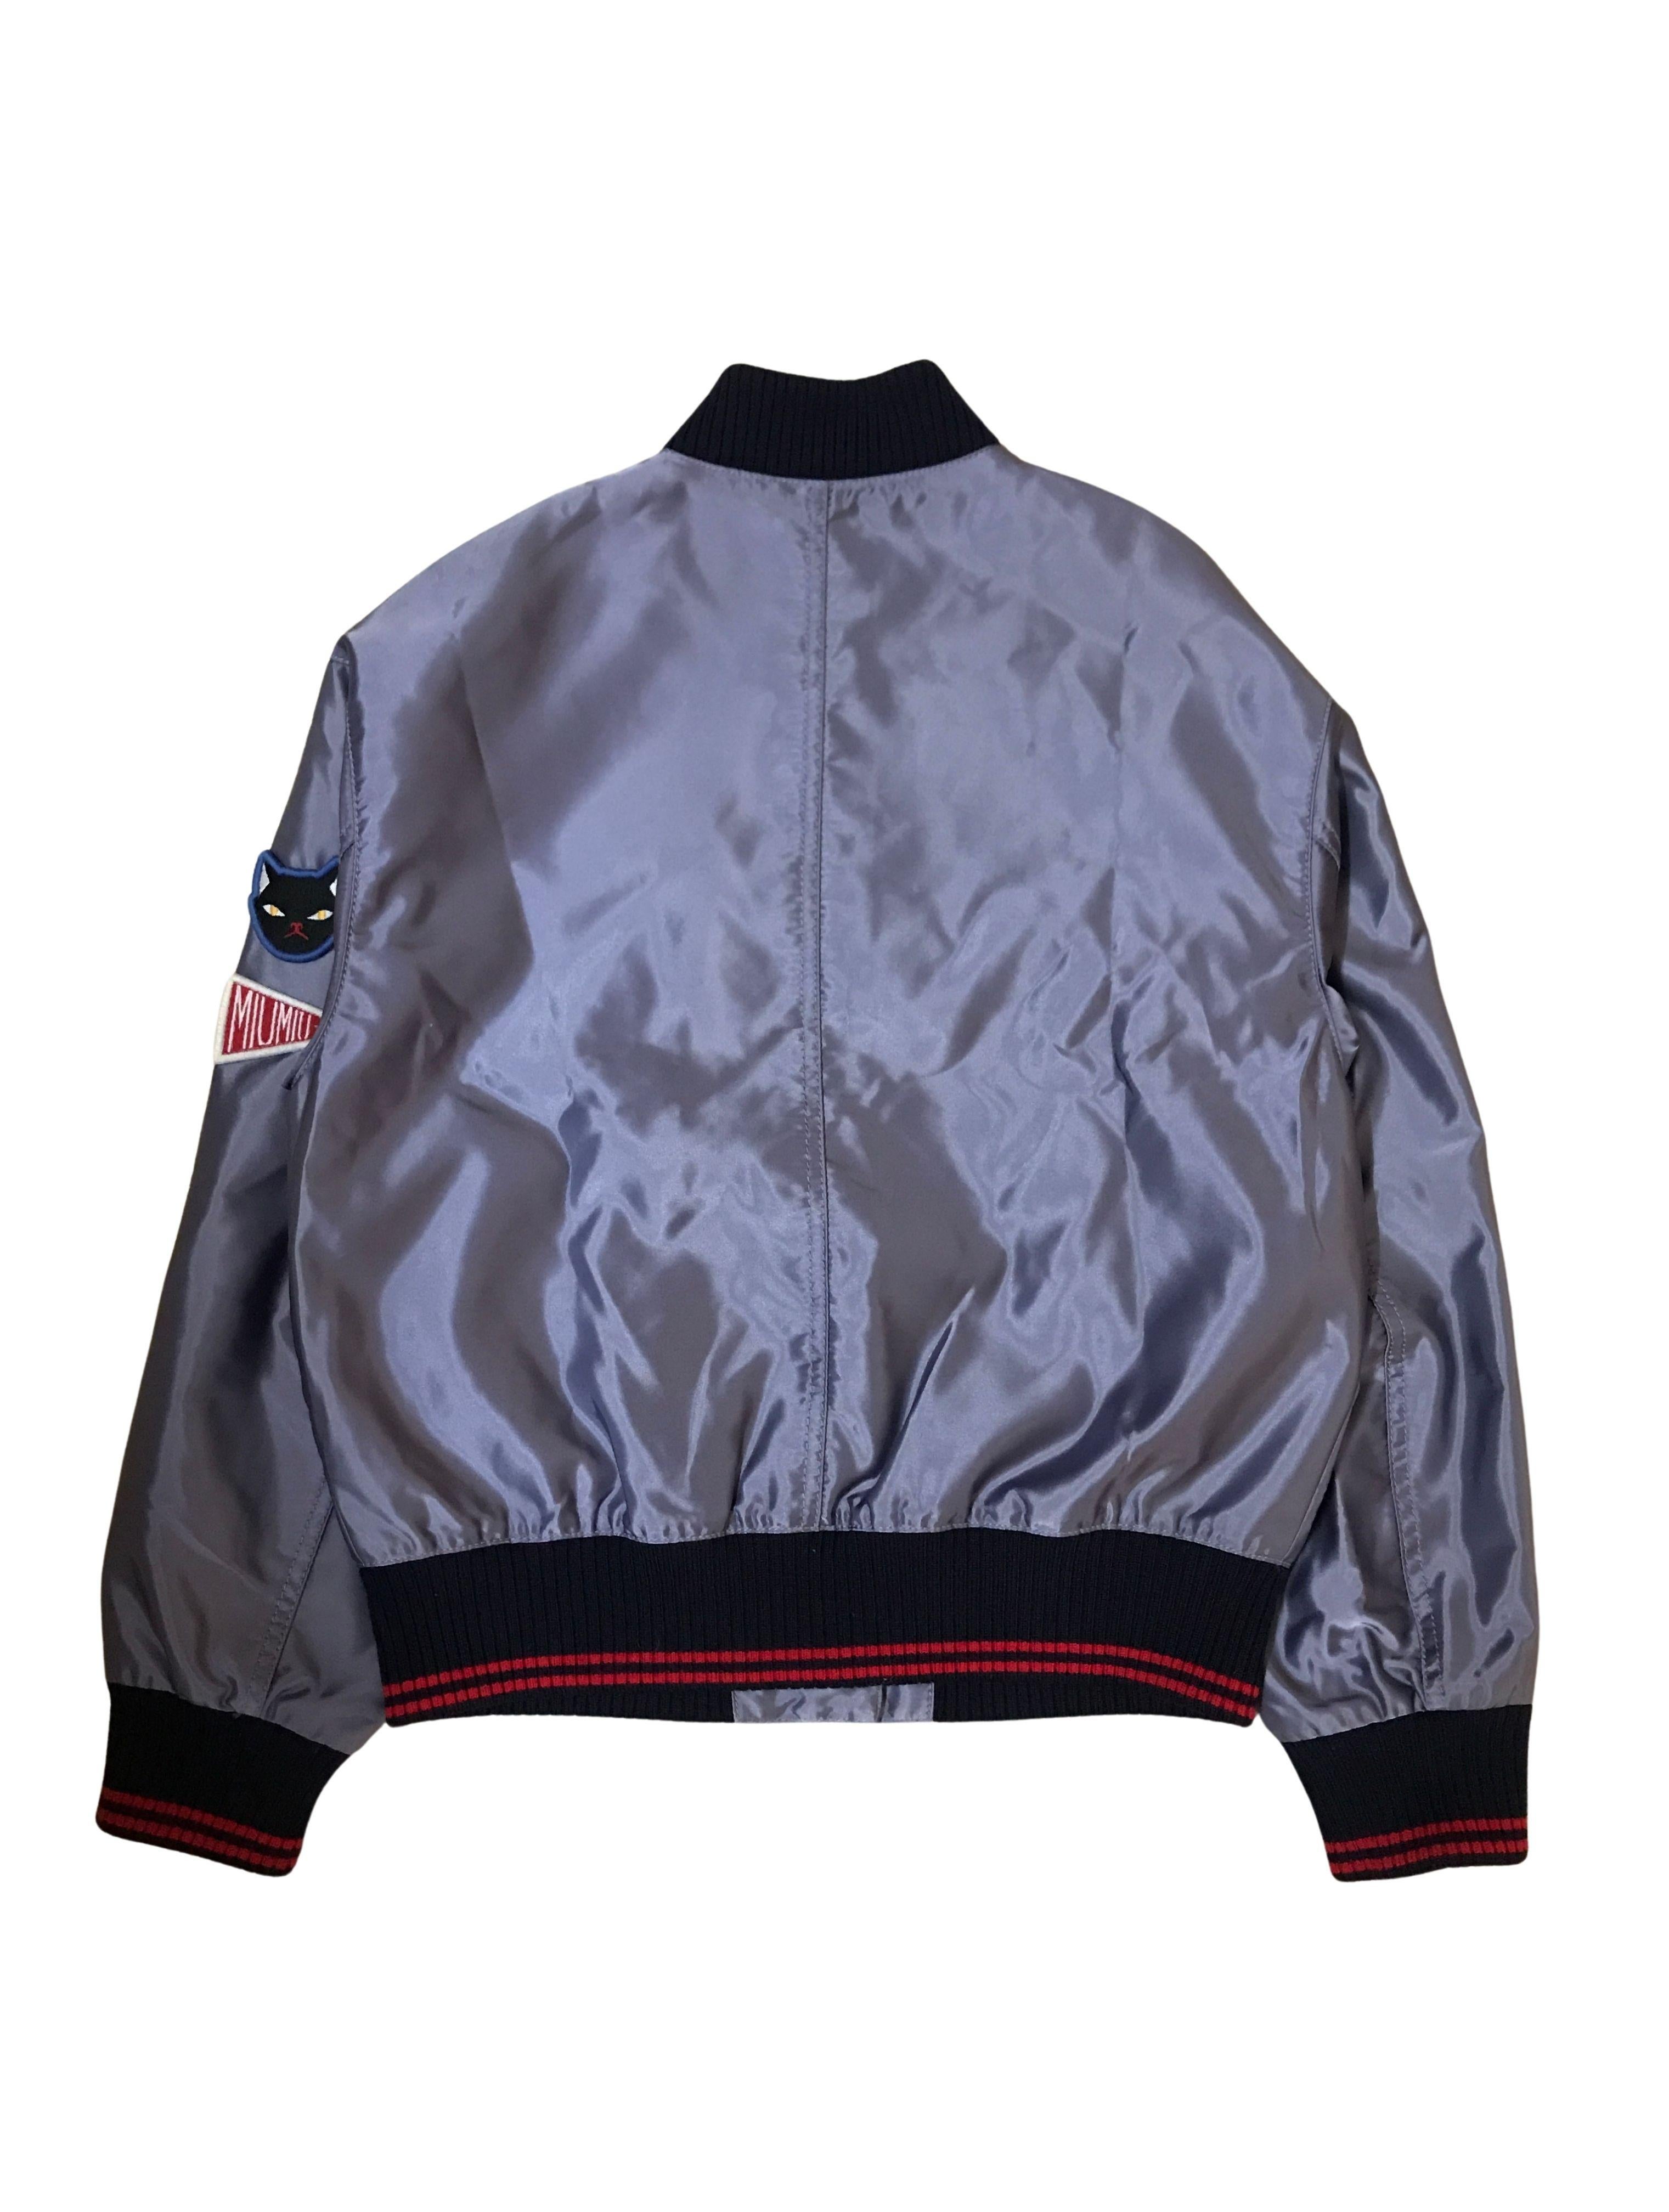 Miu Miu Appliqued bomber from 2018. Japan Exclusive colorway.

Condition: 9/10, no significant signs of usage.

Size: M, fits relaxed.